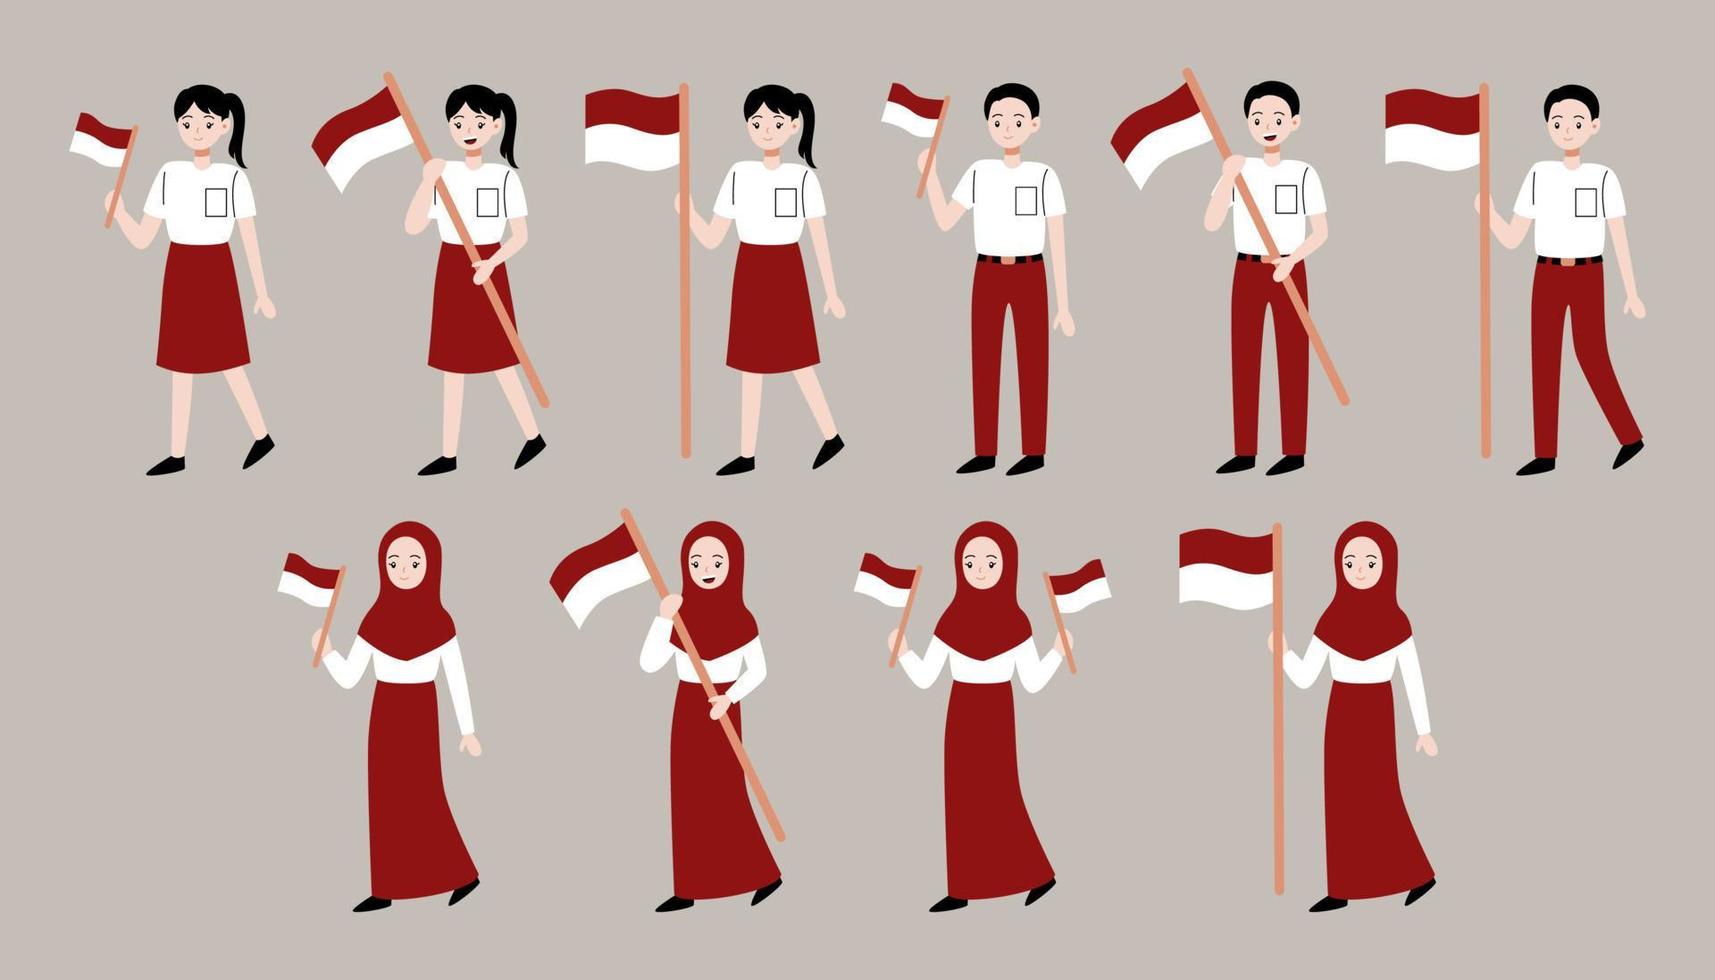 indonesia independence day character holding flag vector